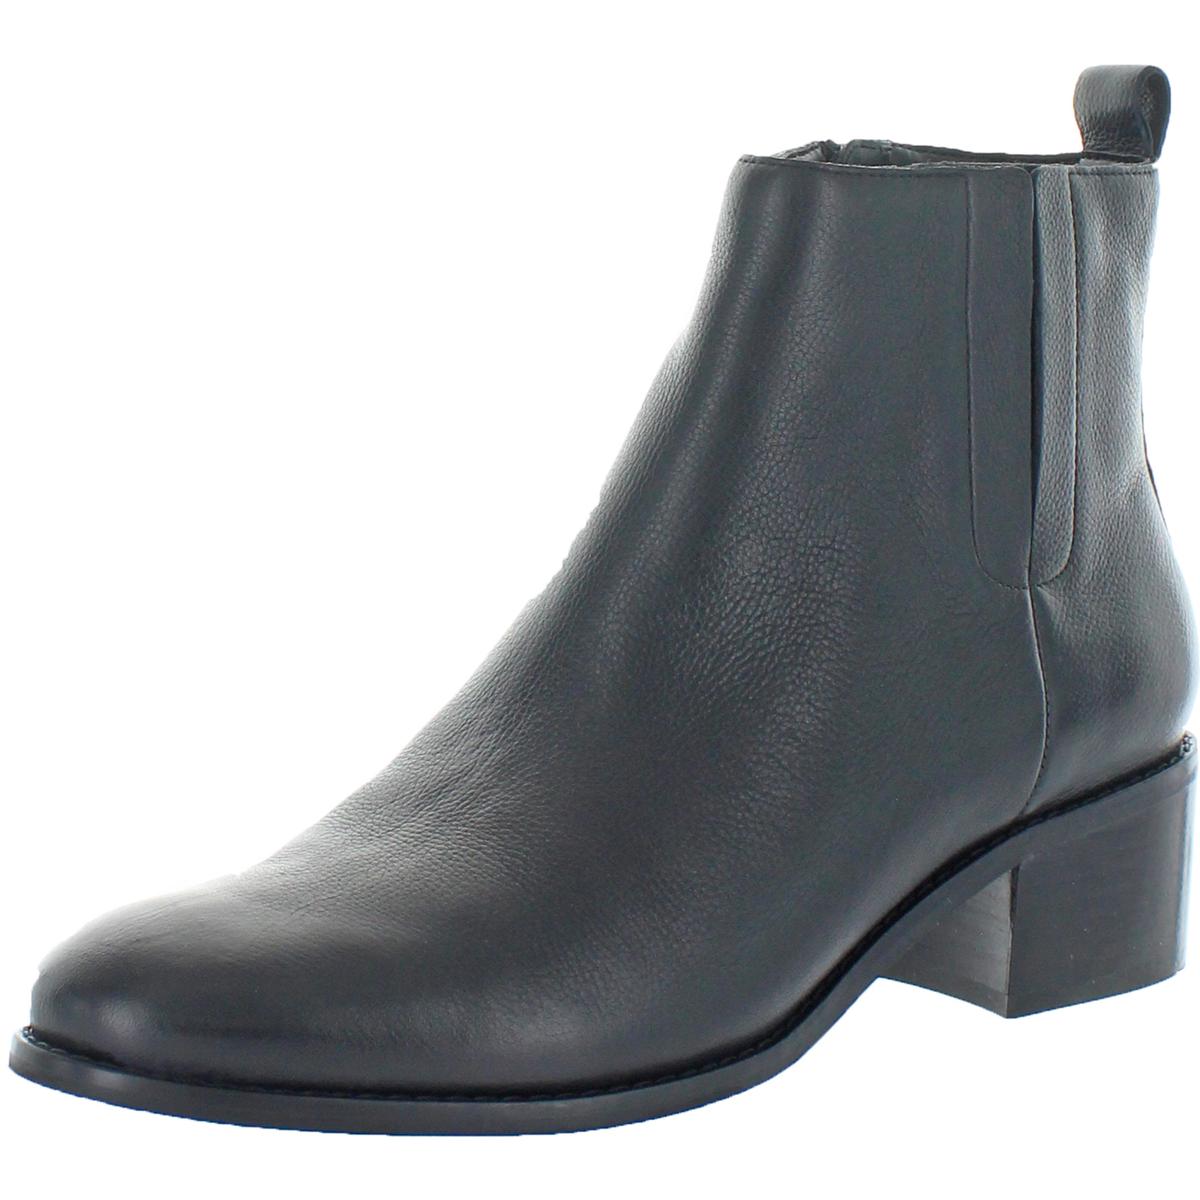 Cole Haan Womens Addie Black Leather Booties Shoes 8 Medium (B,M) BHFO ...